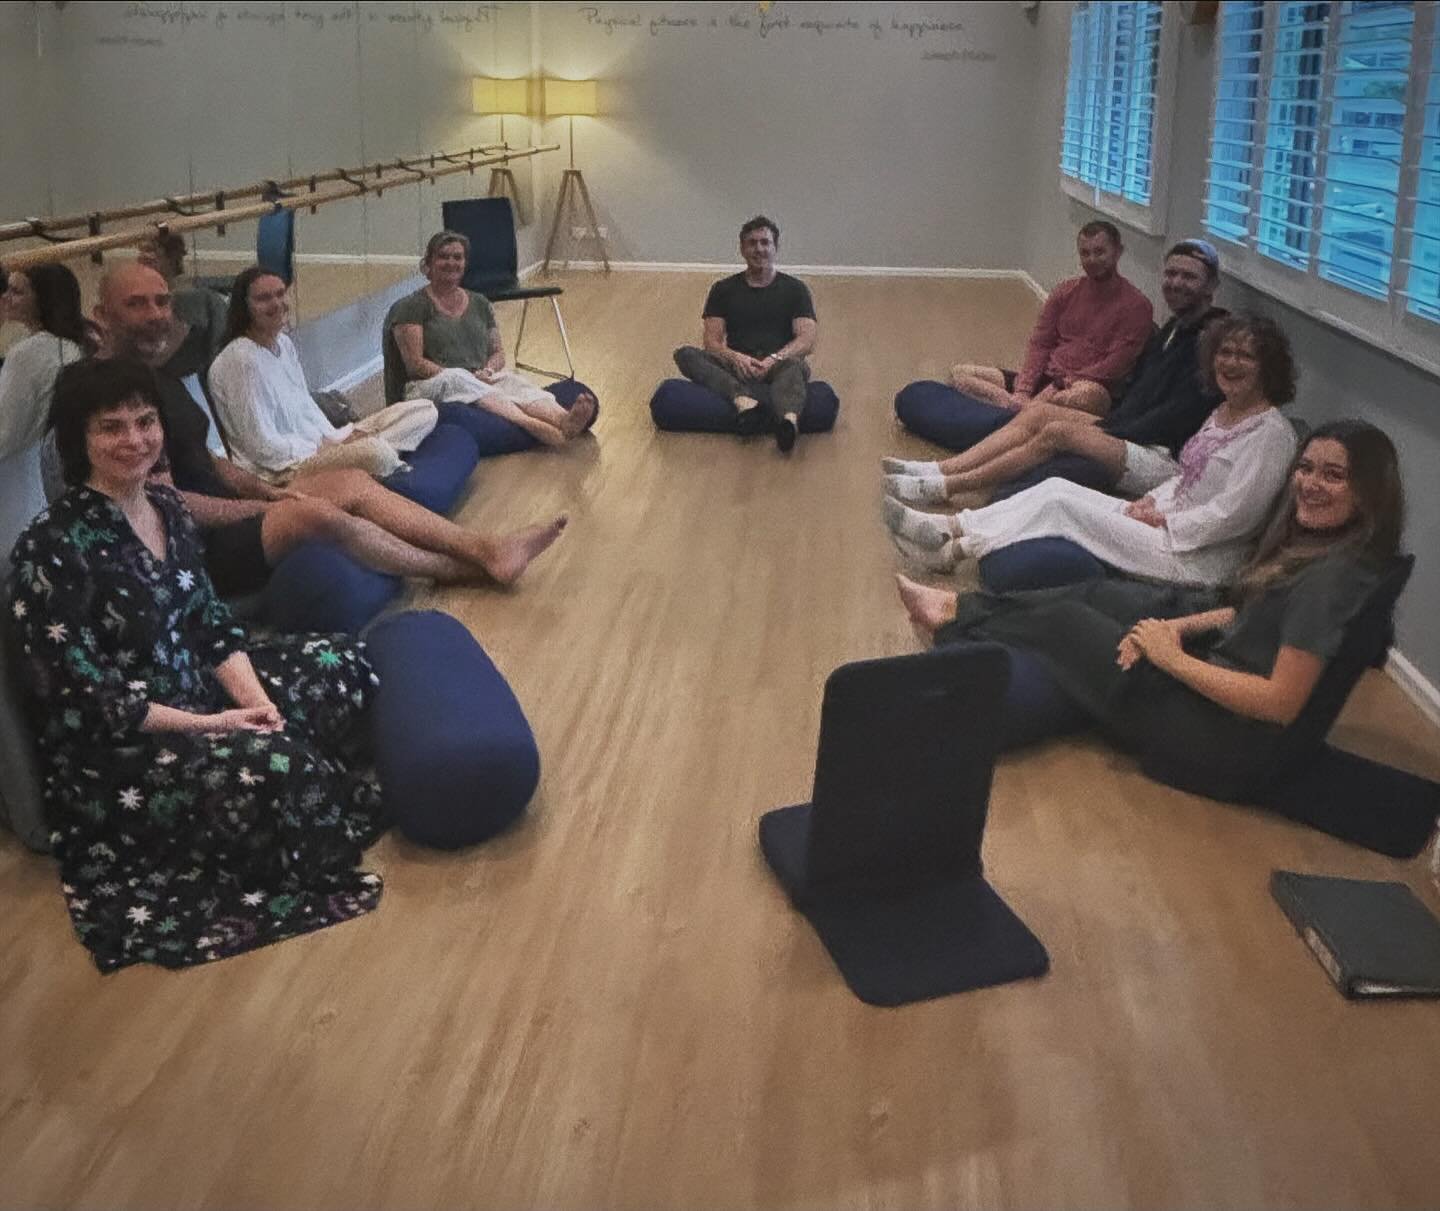 Reflecting on the last 3 days spent with wonderful open hearted humans trusting me as their teacher of meditation.

What stood out for me was the support, empathy, vulnerability and honesty that was shared within the group which fostered such authent